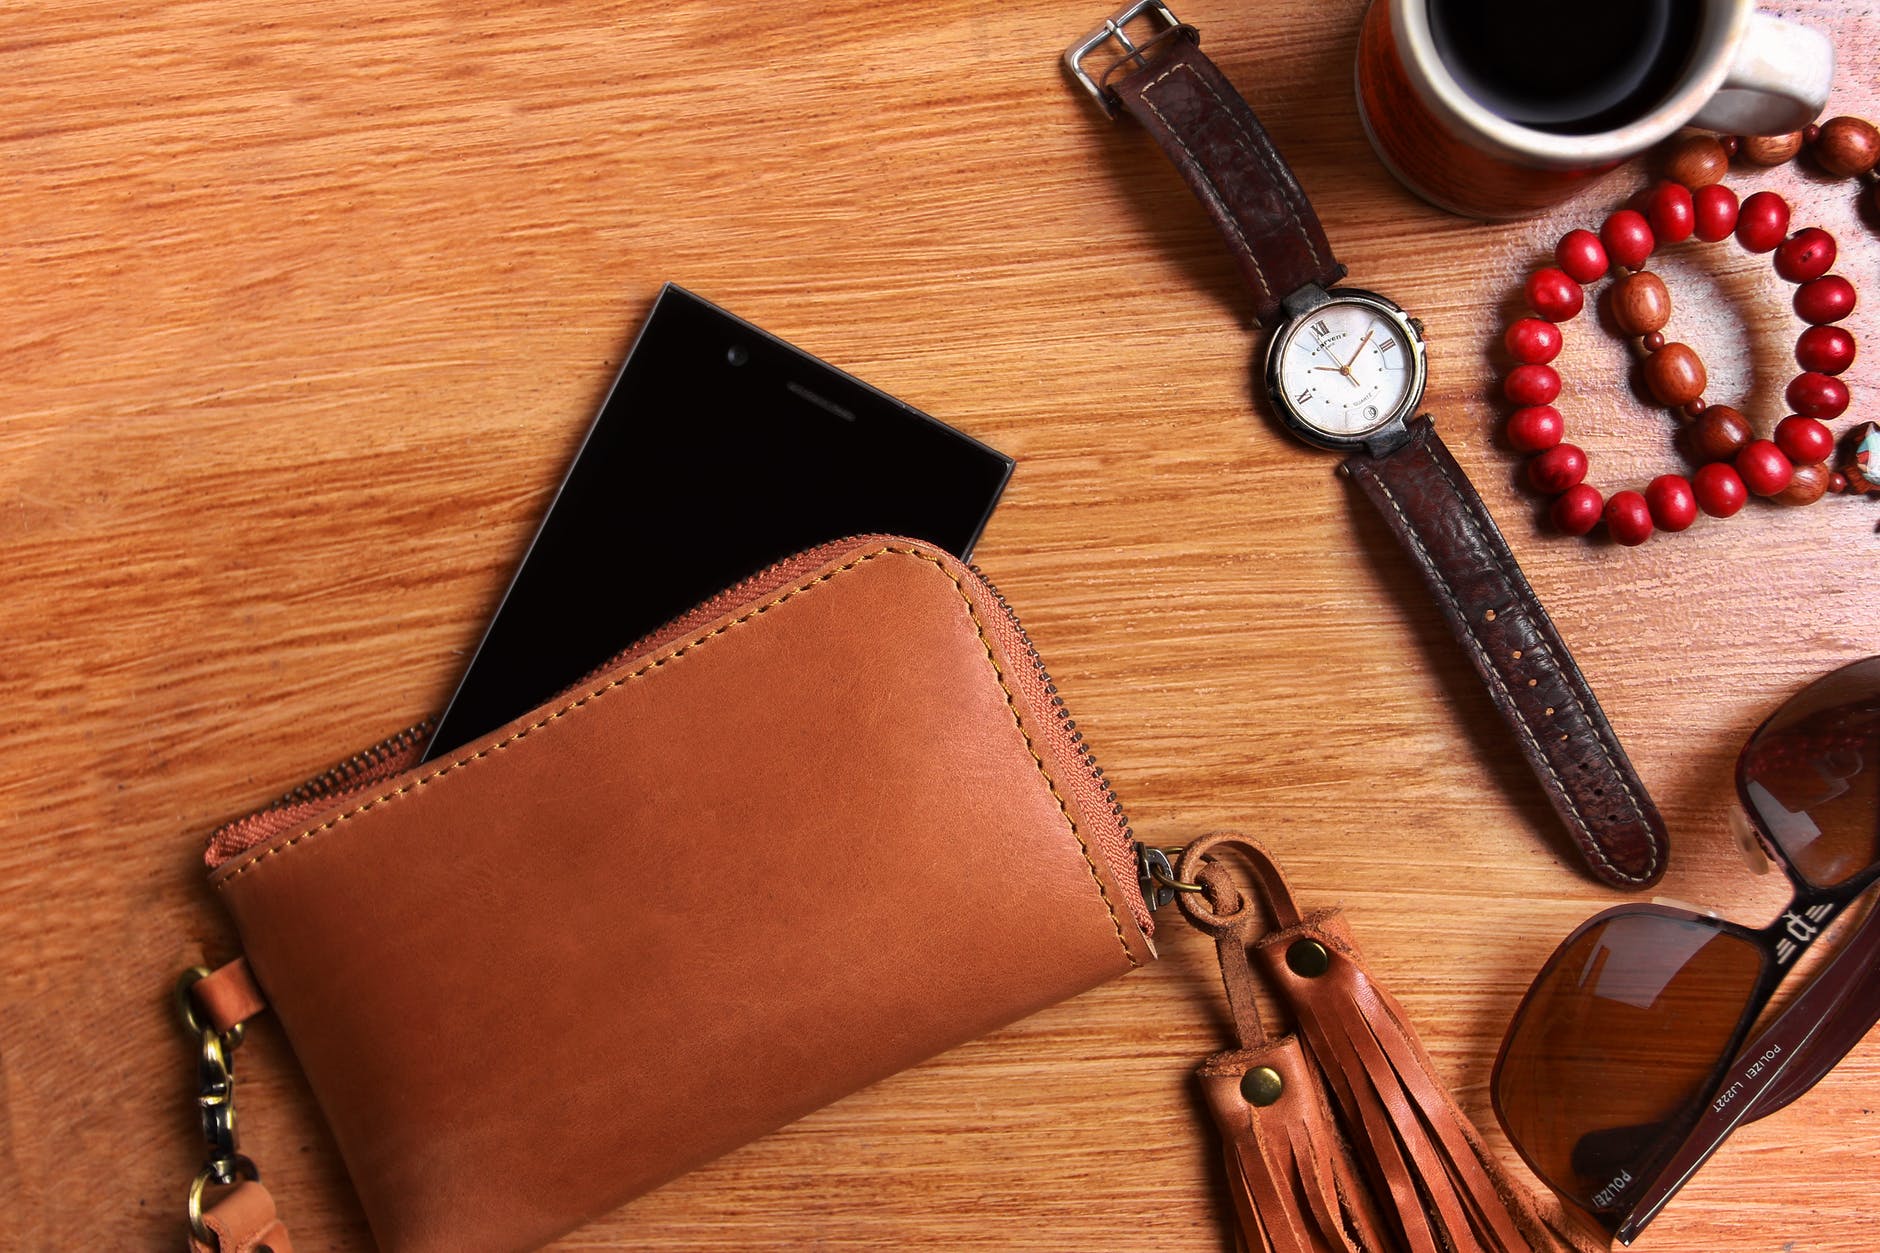 Ethical and Sustainable Leather Guide - brown leather wallet with phone, watch, and key on wood table